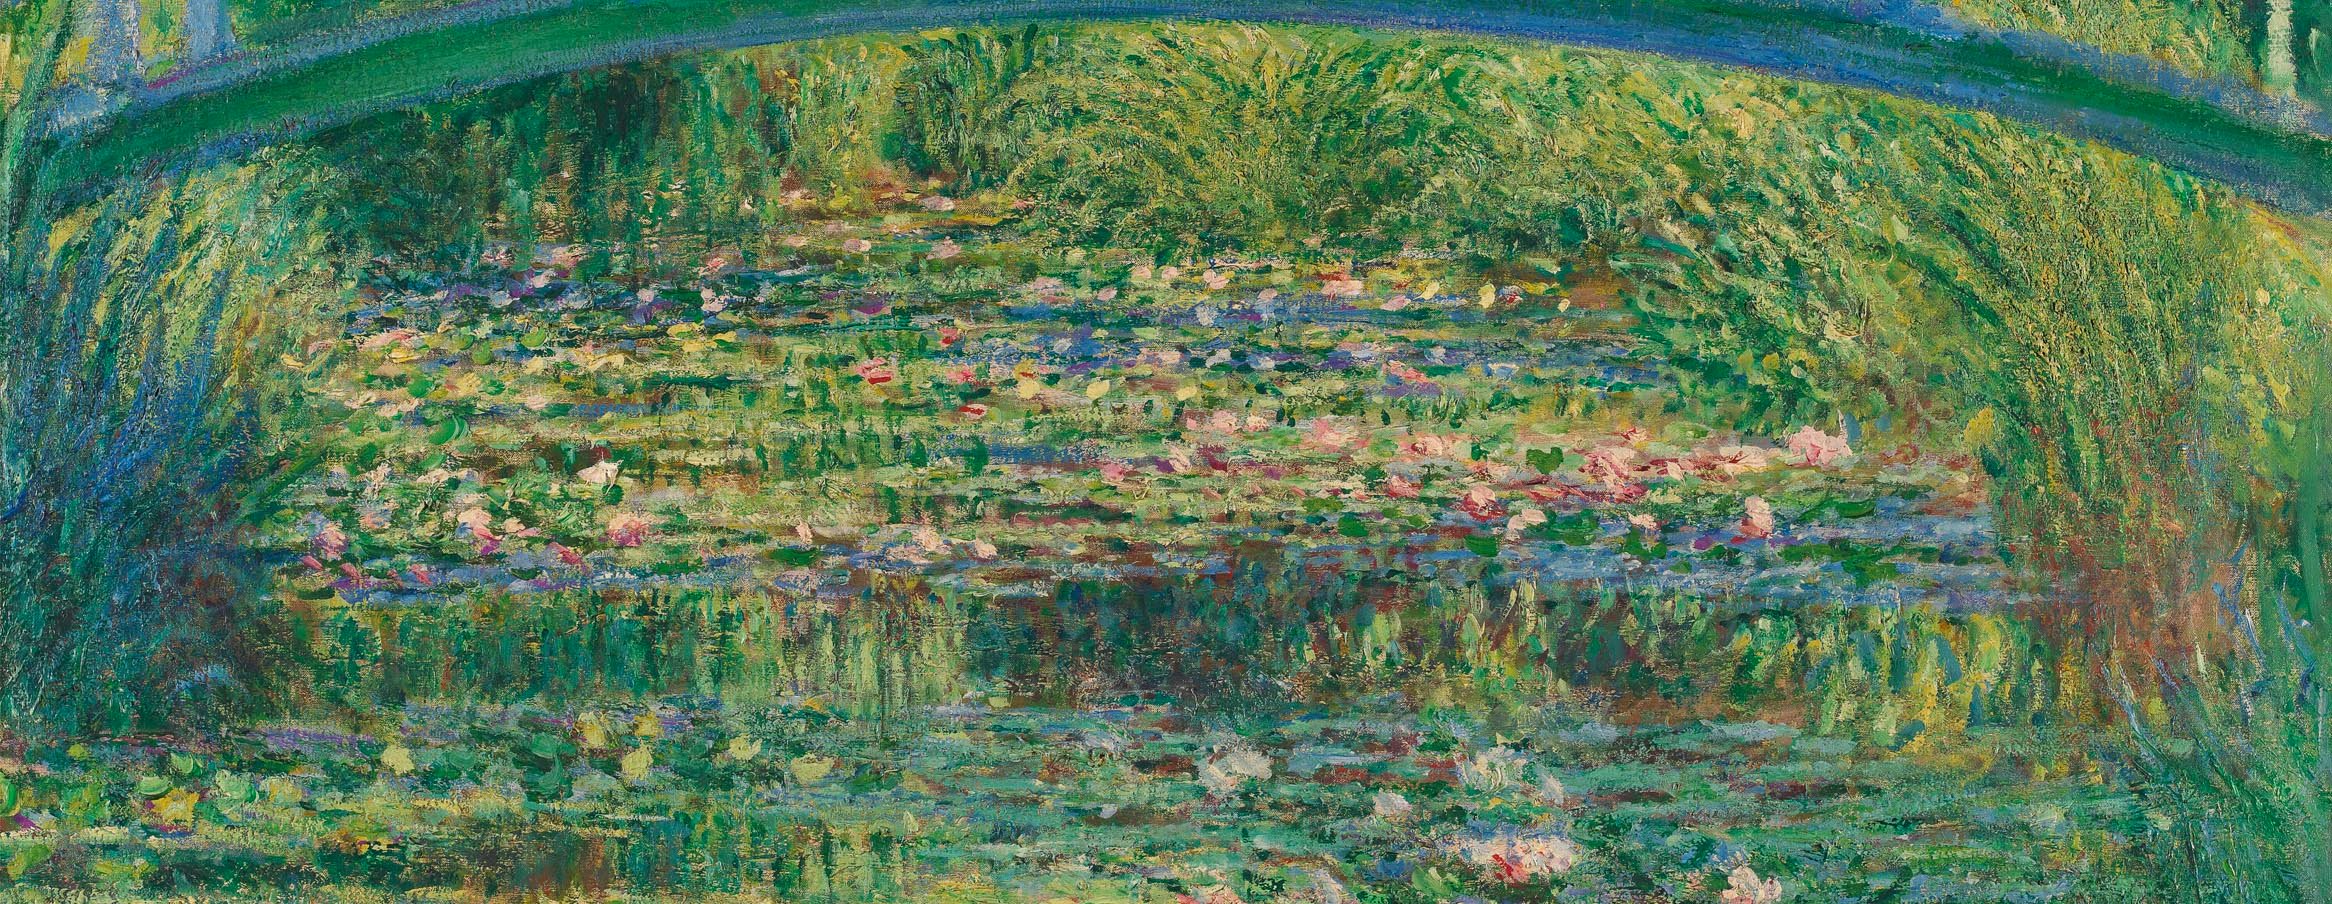 Claude Monet And His Water Lilies At The Musee De L Orangerie